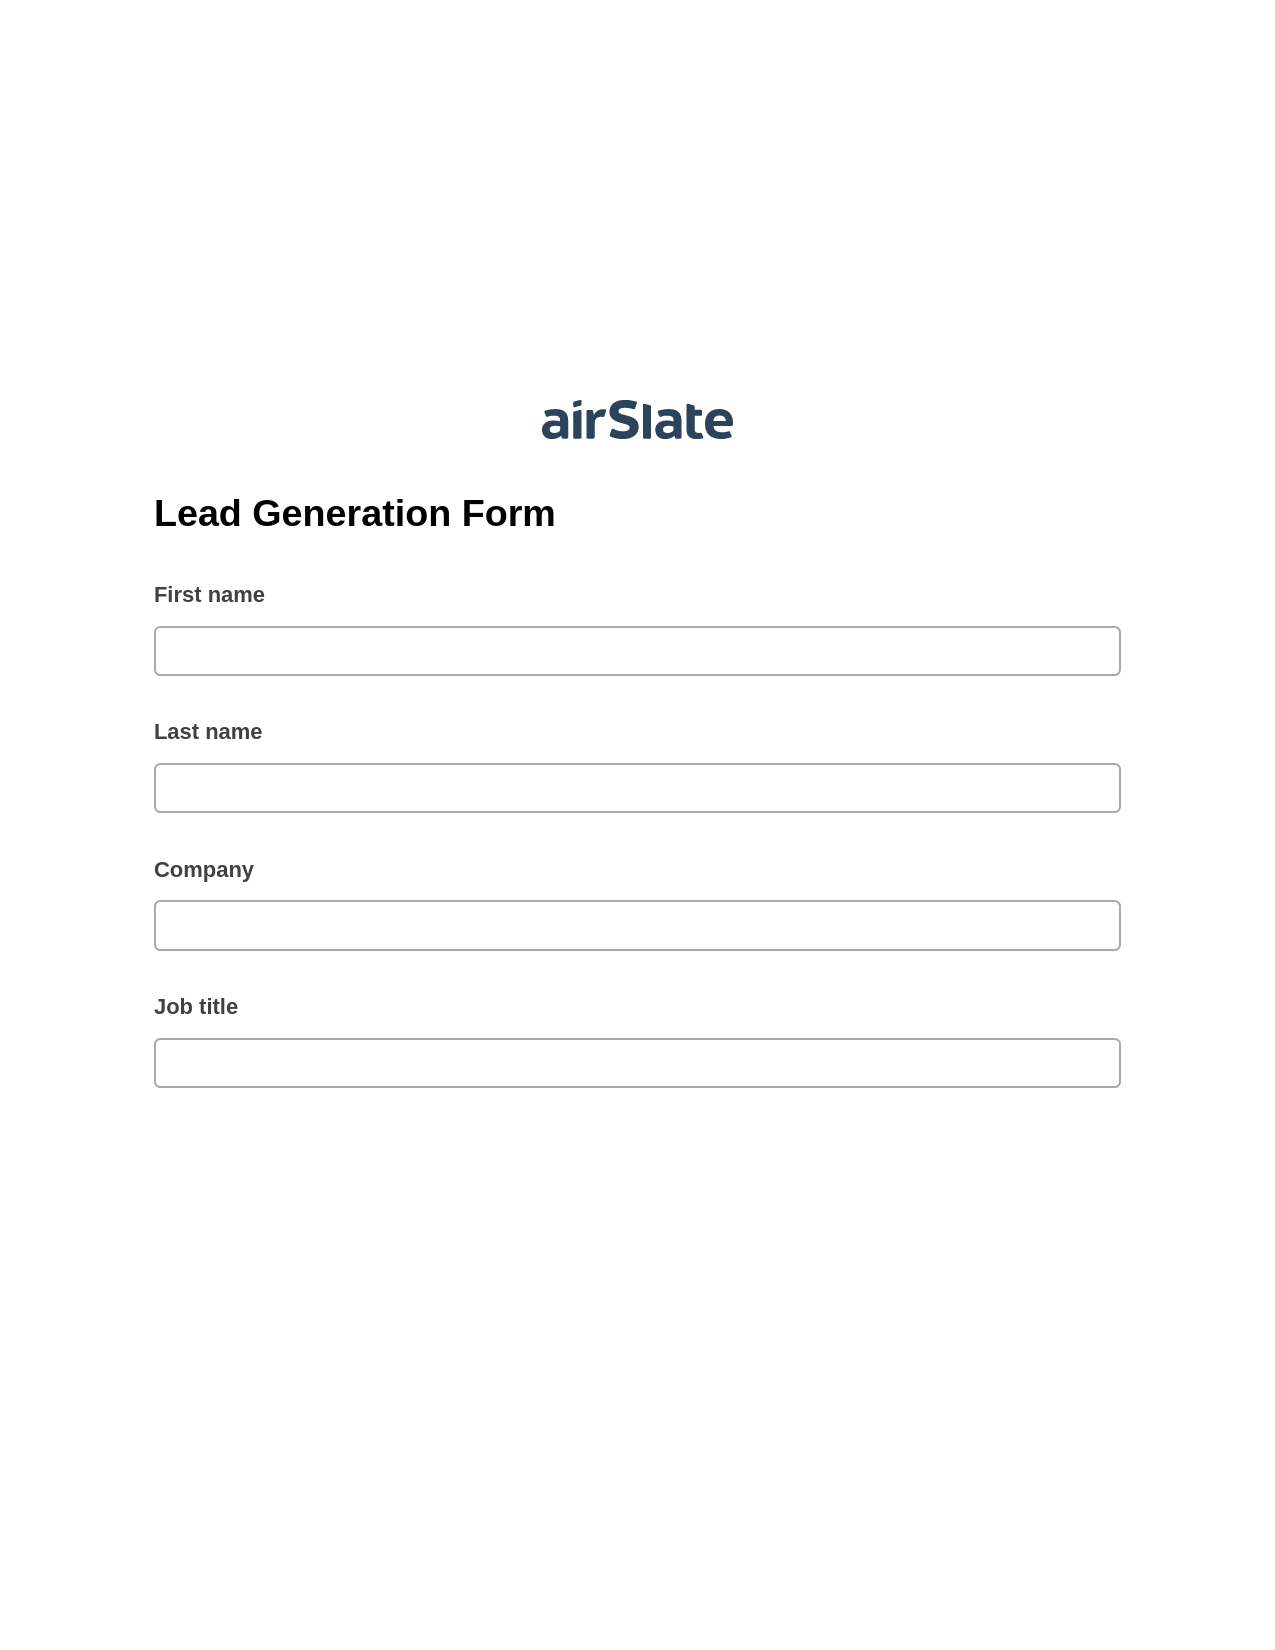 Lead Generation Form Pre-fill Document Bot, Create Slate every Google Sheet Update Bot, Export to Google Sheet Bot